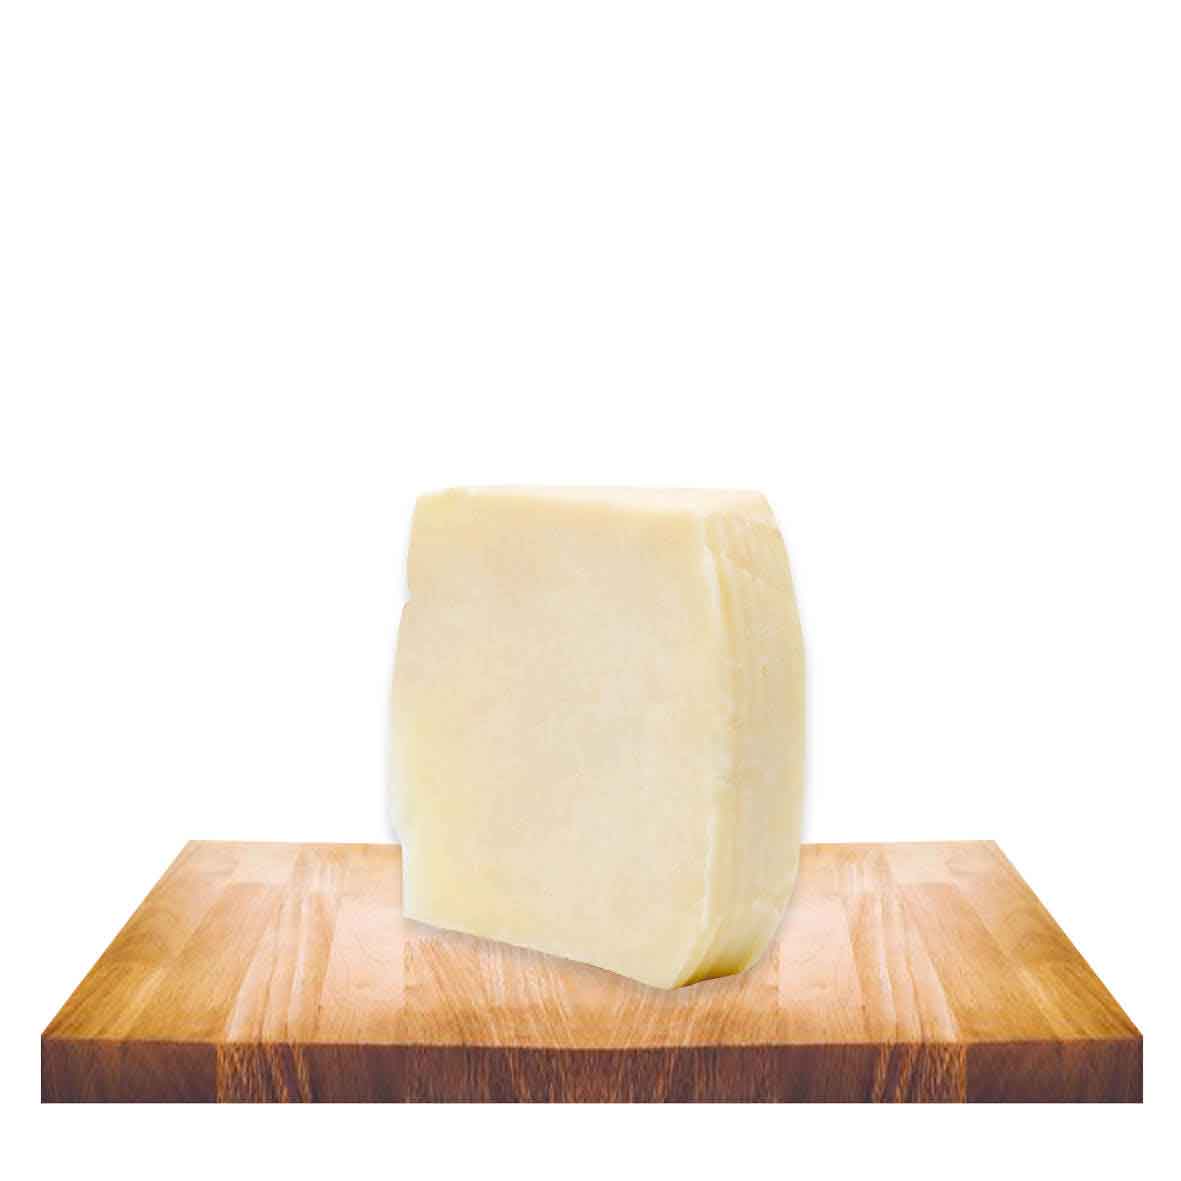 Aged Canestrato Cheese